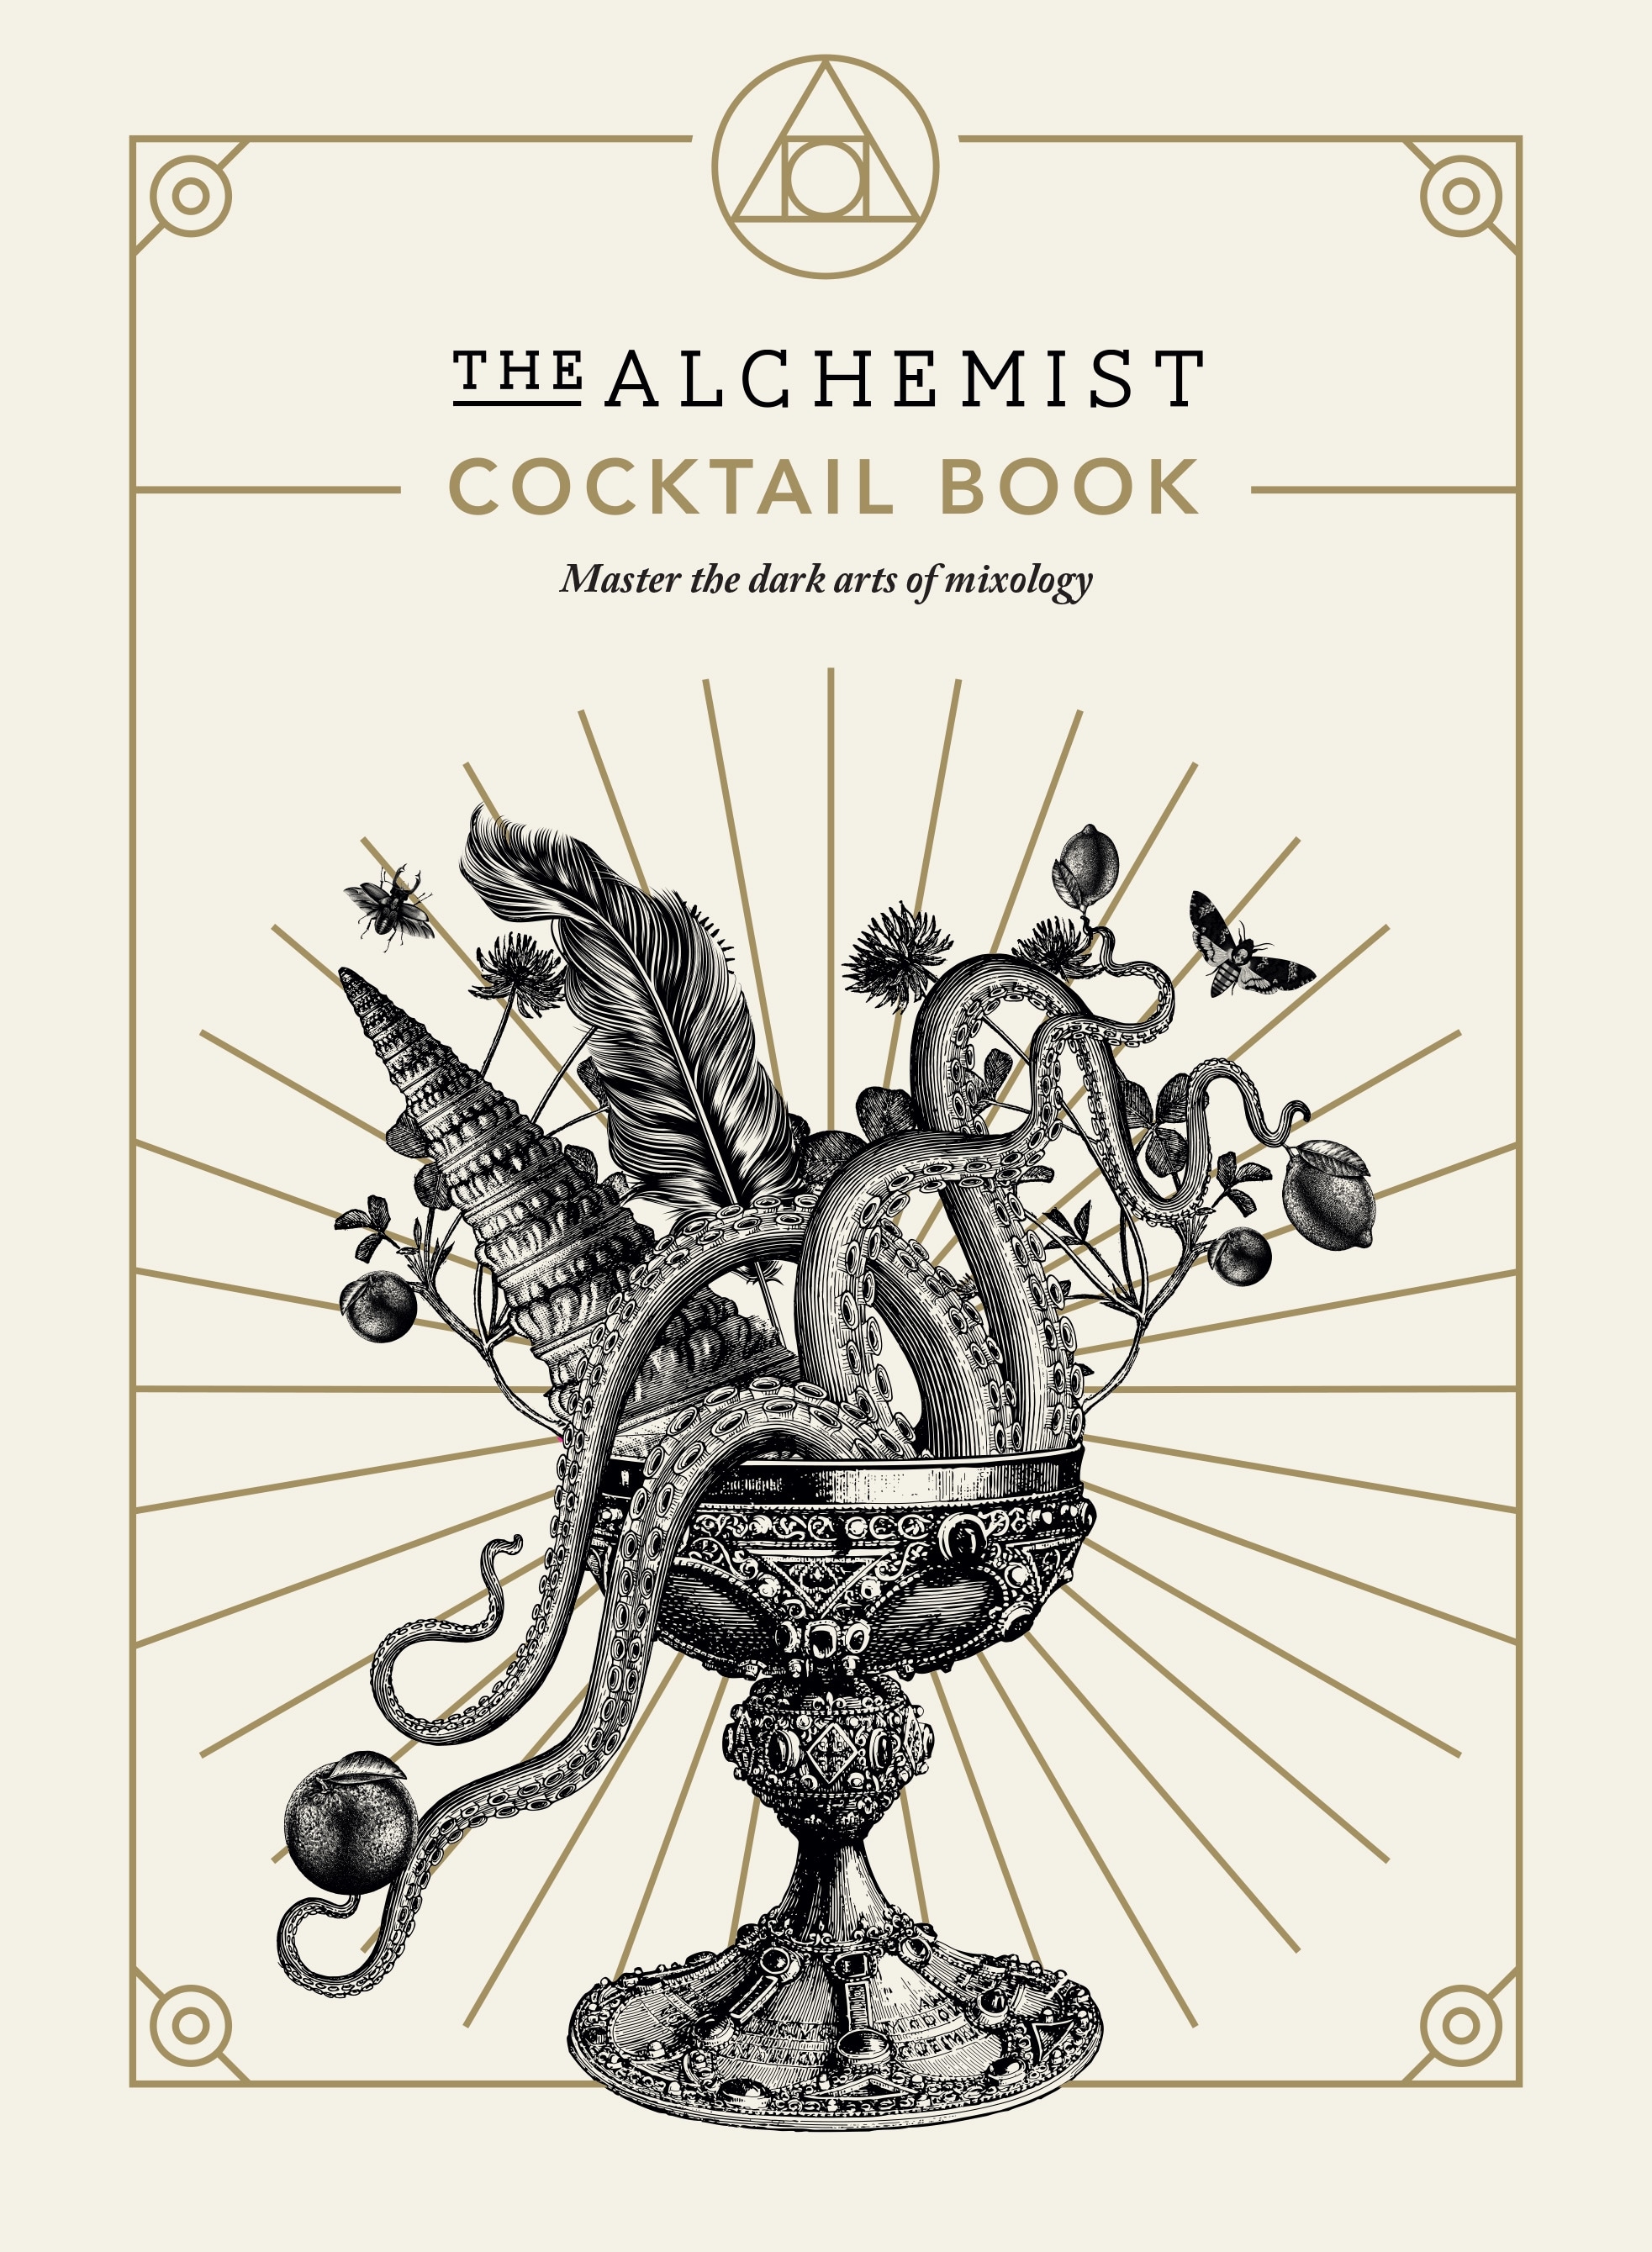 Book “The Alchemist Cocktail Book” by The Alchemist — May 6, 2021